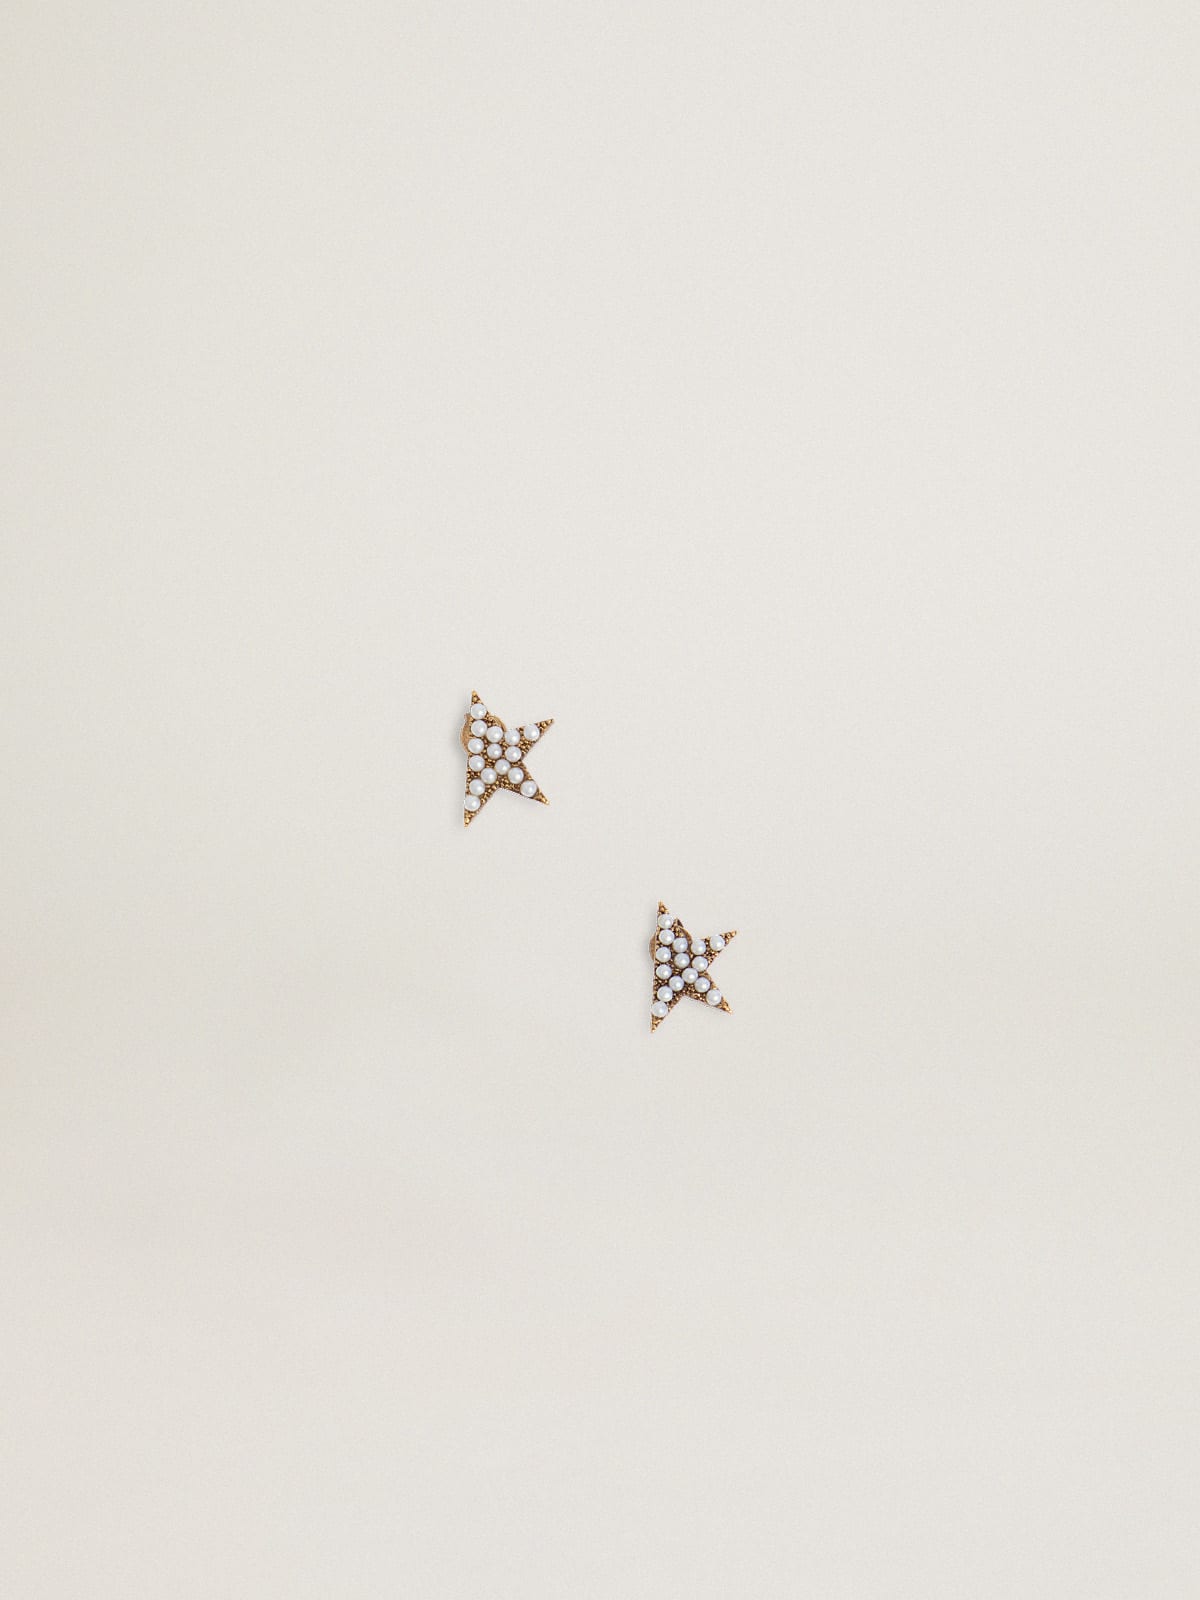 Star Jewelmates Collection stud earrings in old gold color with decorative beads